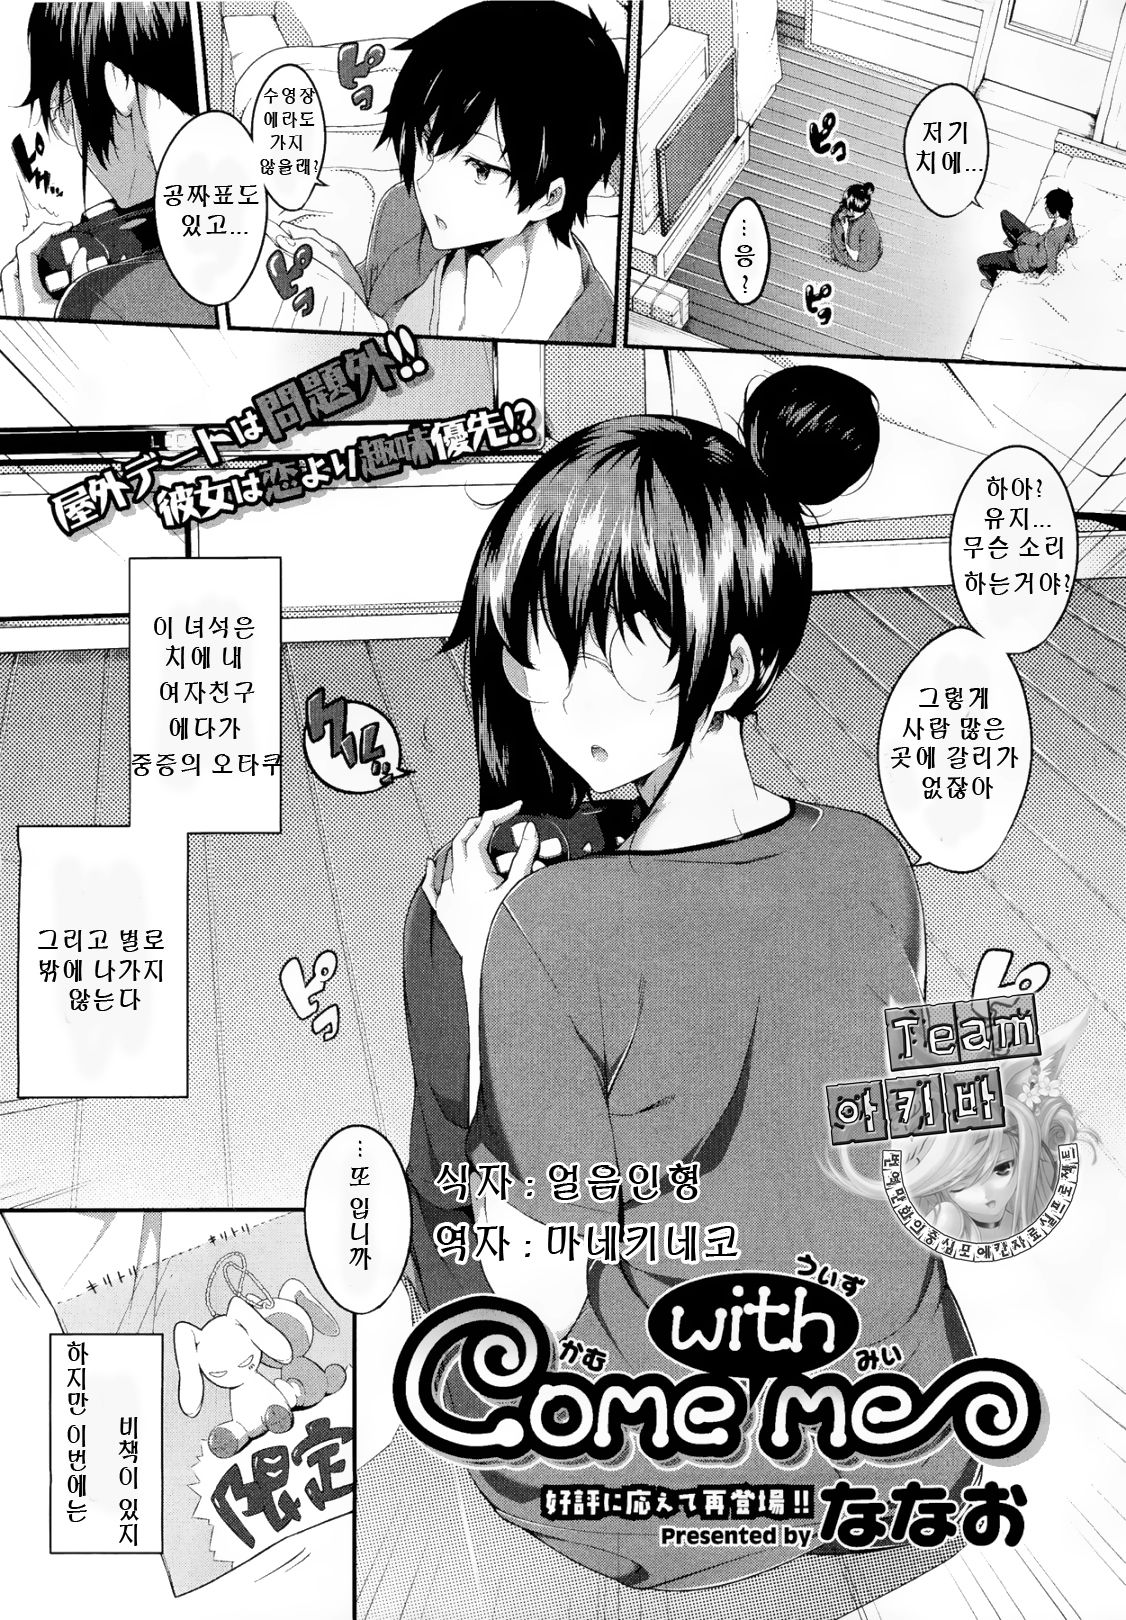 [Nanao] Come with Me (COMIC Megastore 2012-02) [Korean] [Team 아키바] [ななお] come with me (コミックメガストア 2012年2月号) [韓国翻訳]